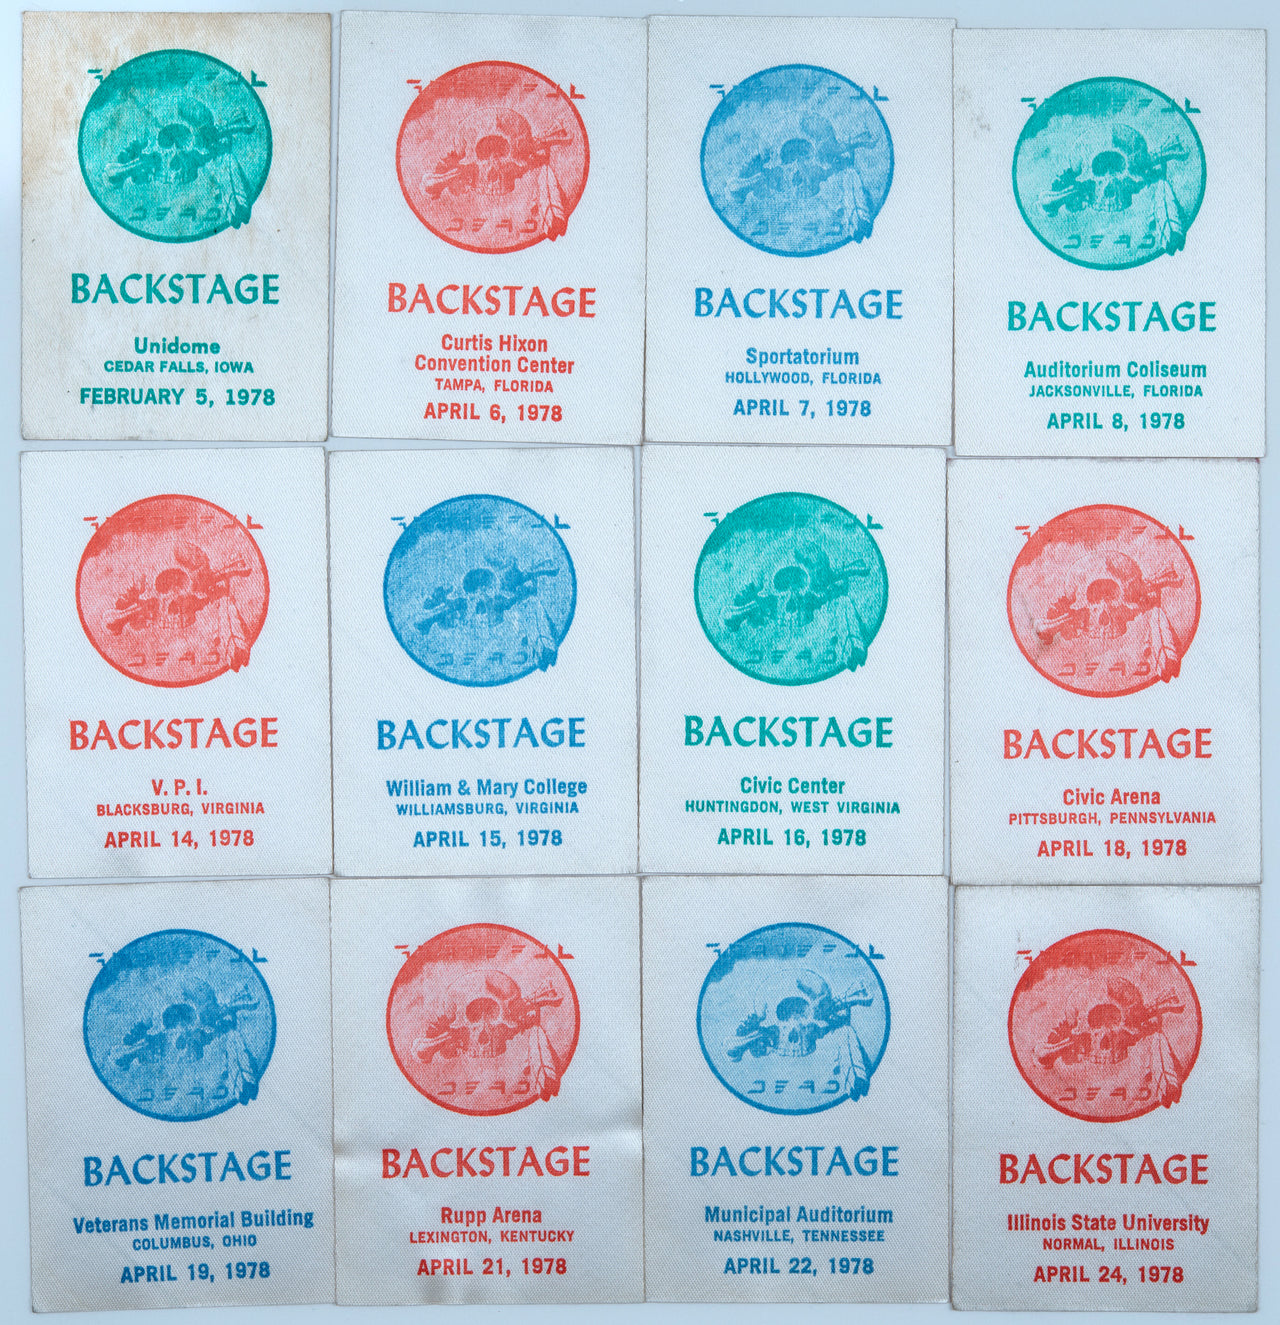 Grateful Dead Backstage Passes (2/5/1978 - 4/24/1978) from Dan Healy